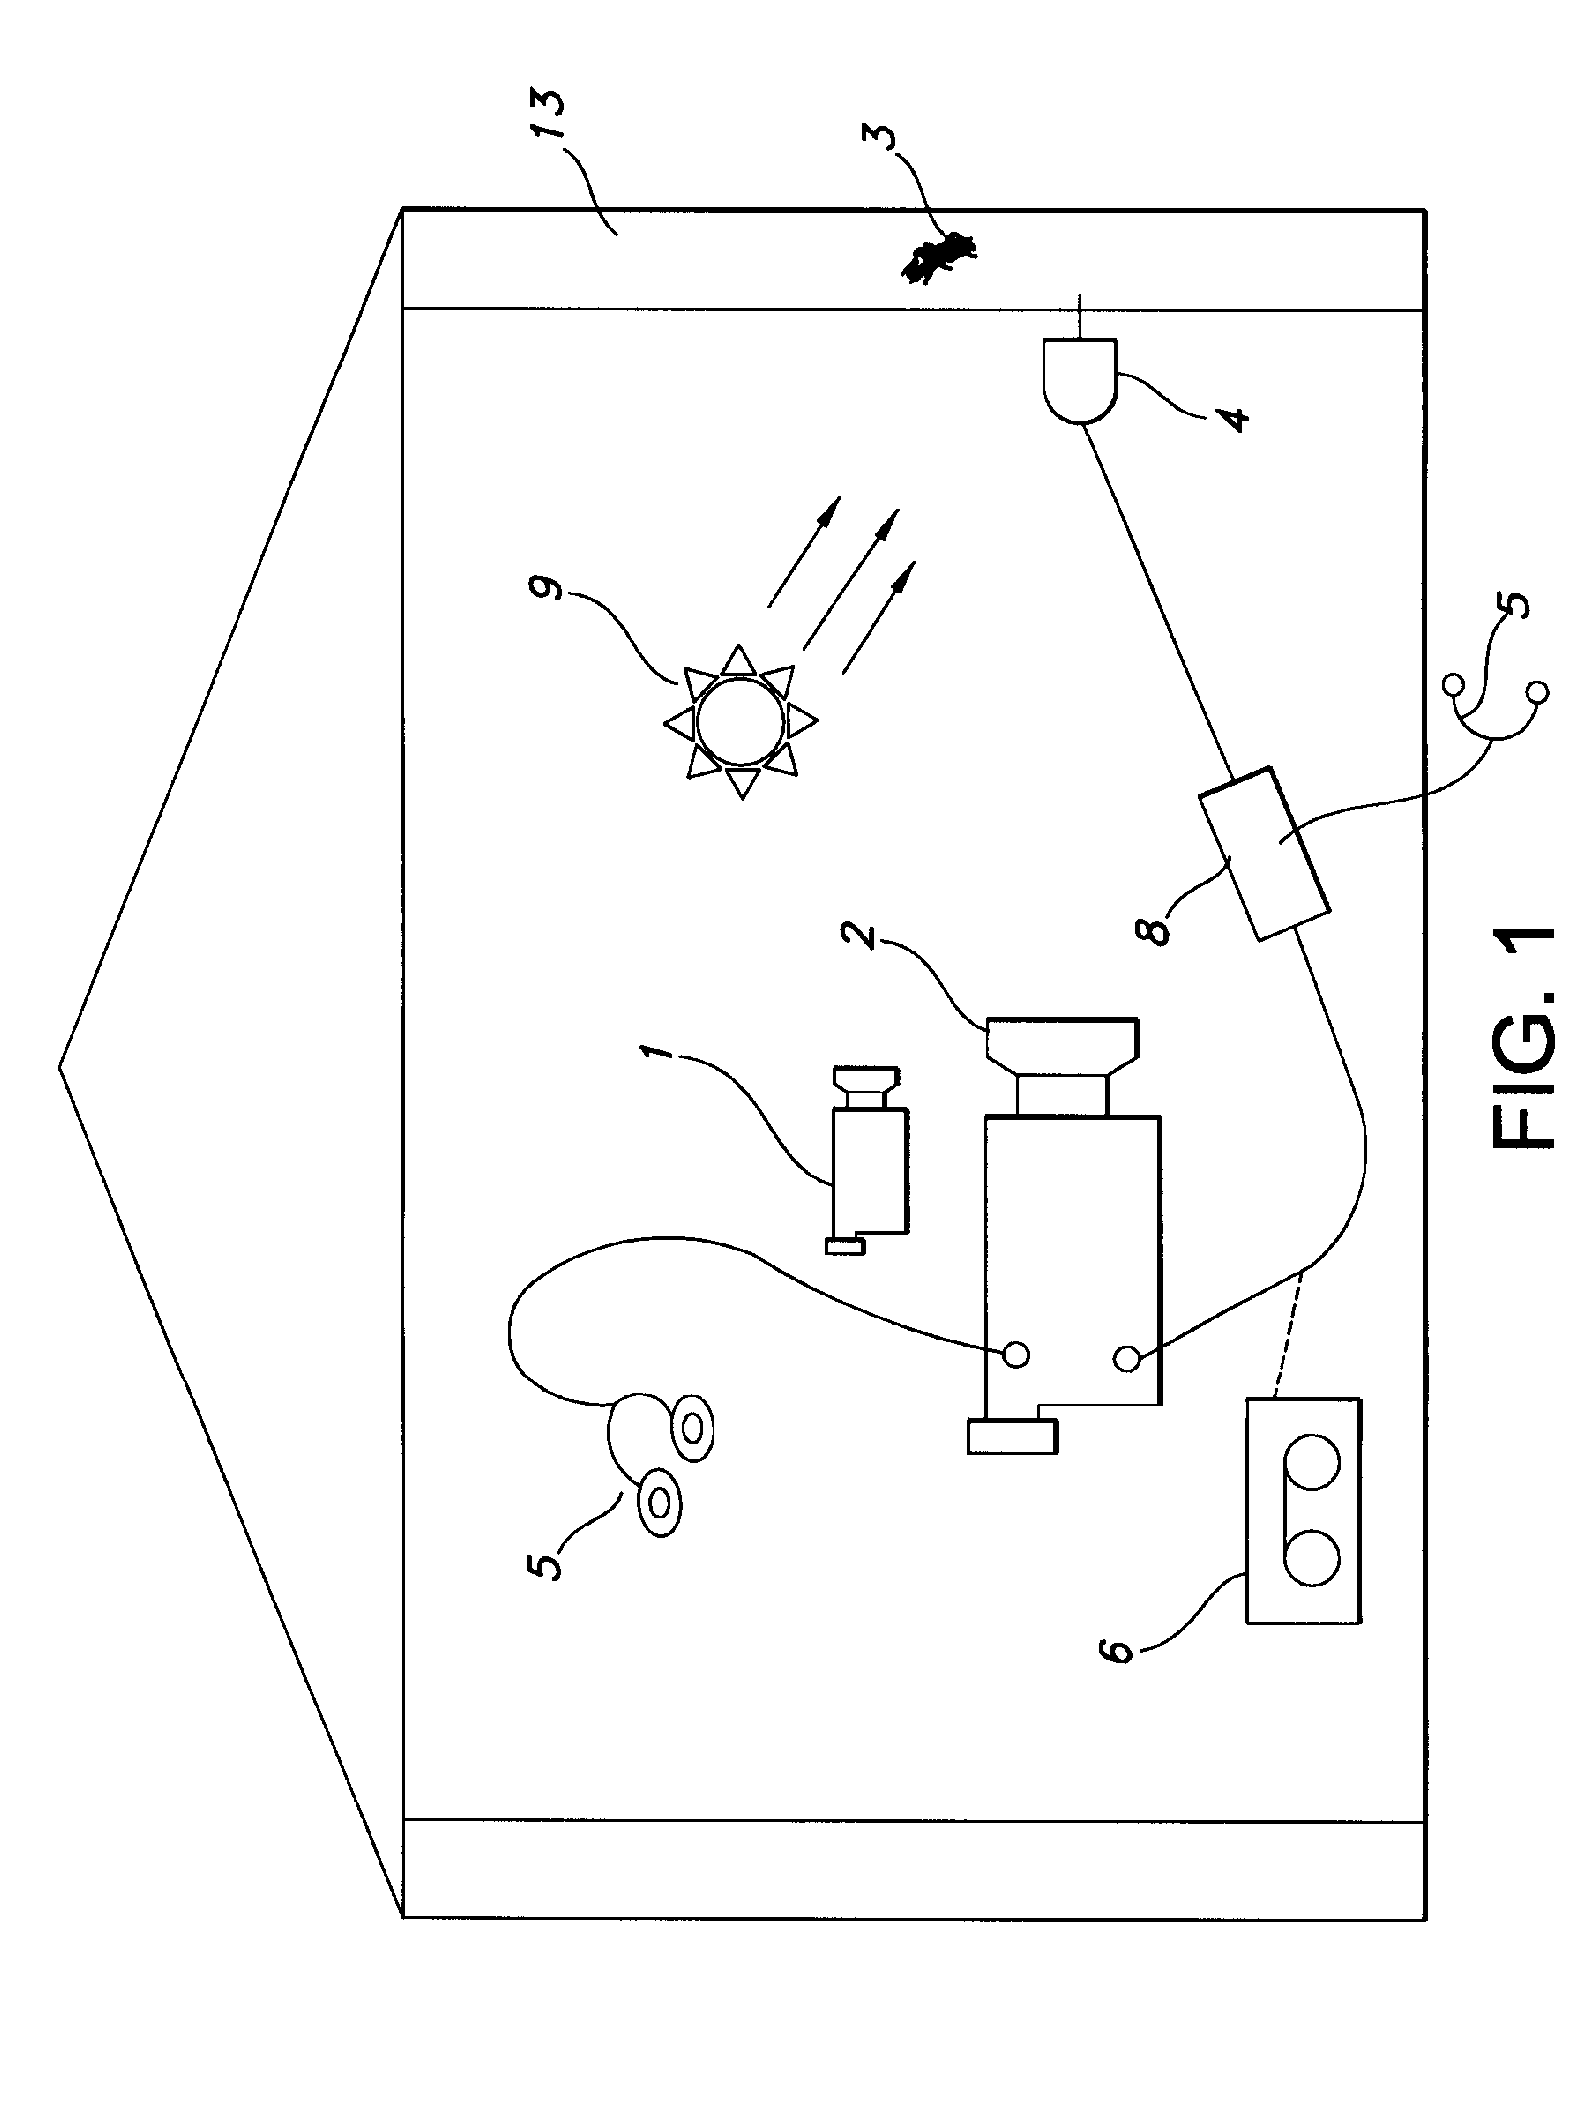 Method to detect termite infestation in a structure